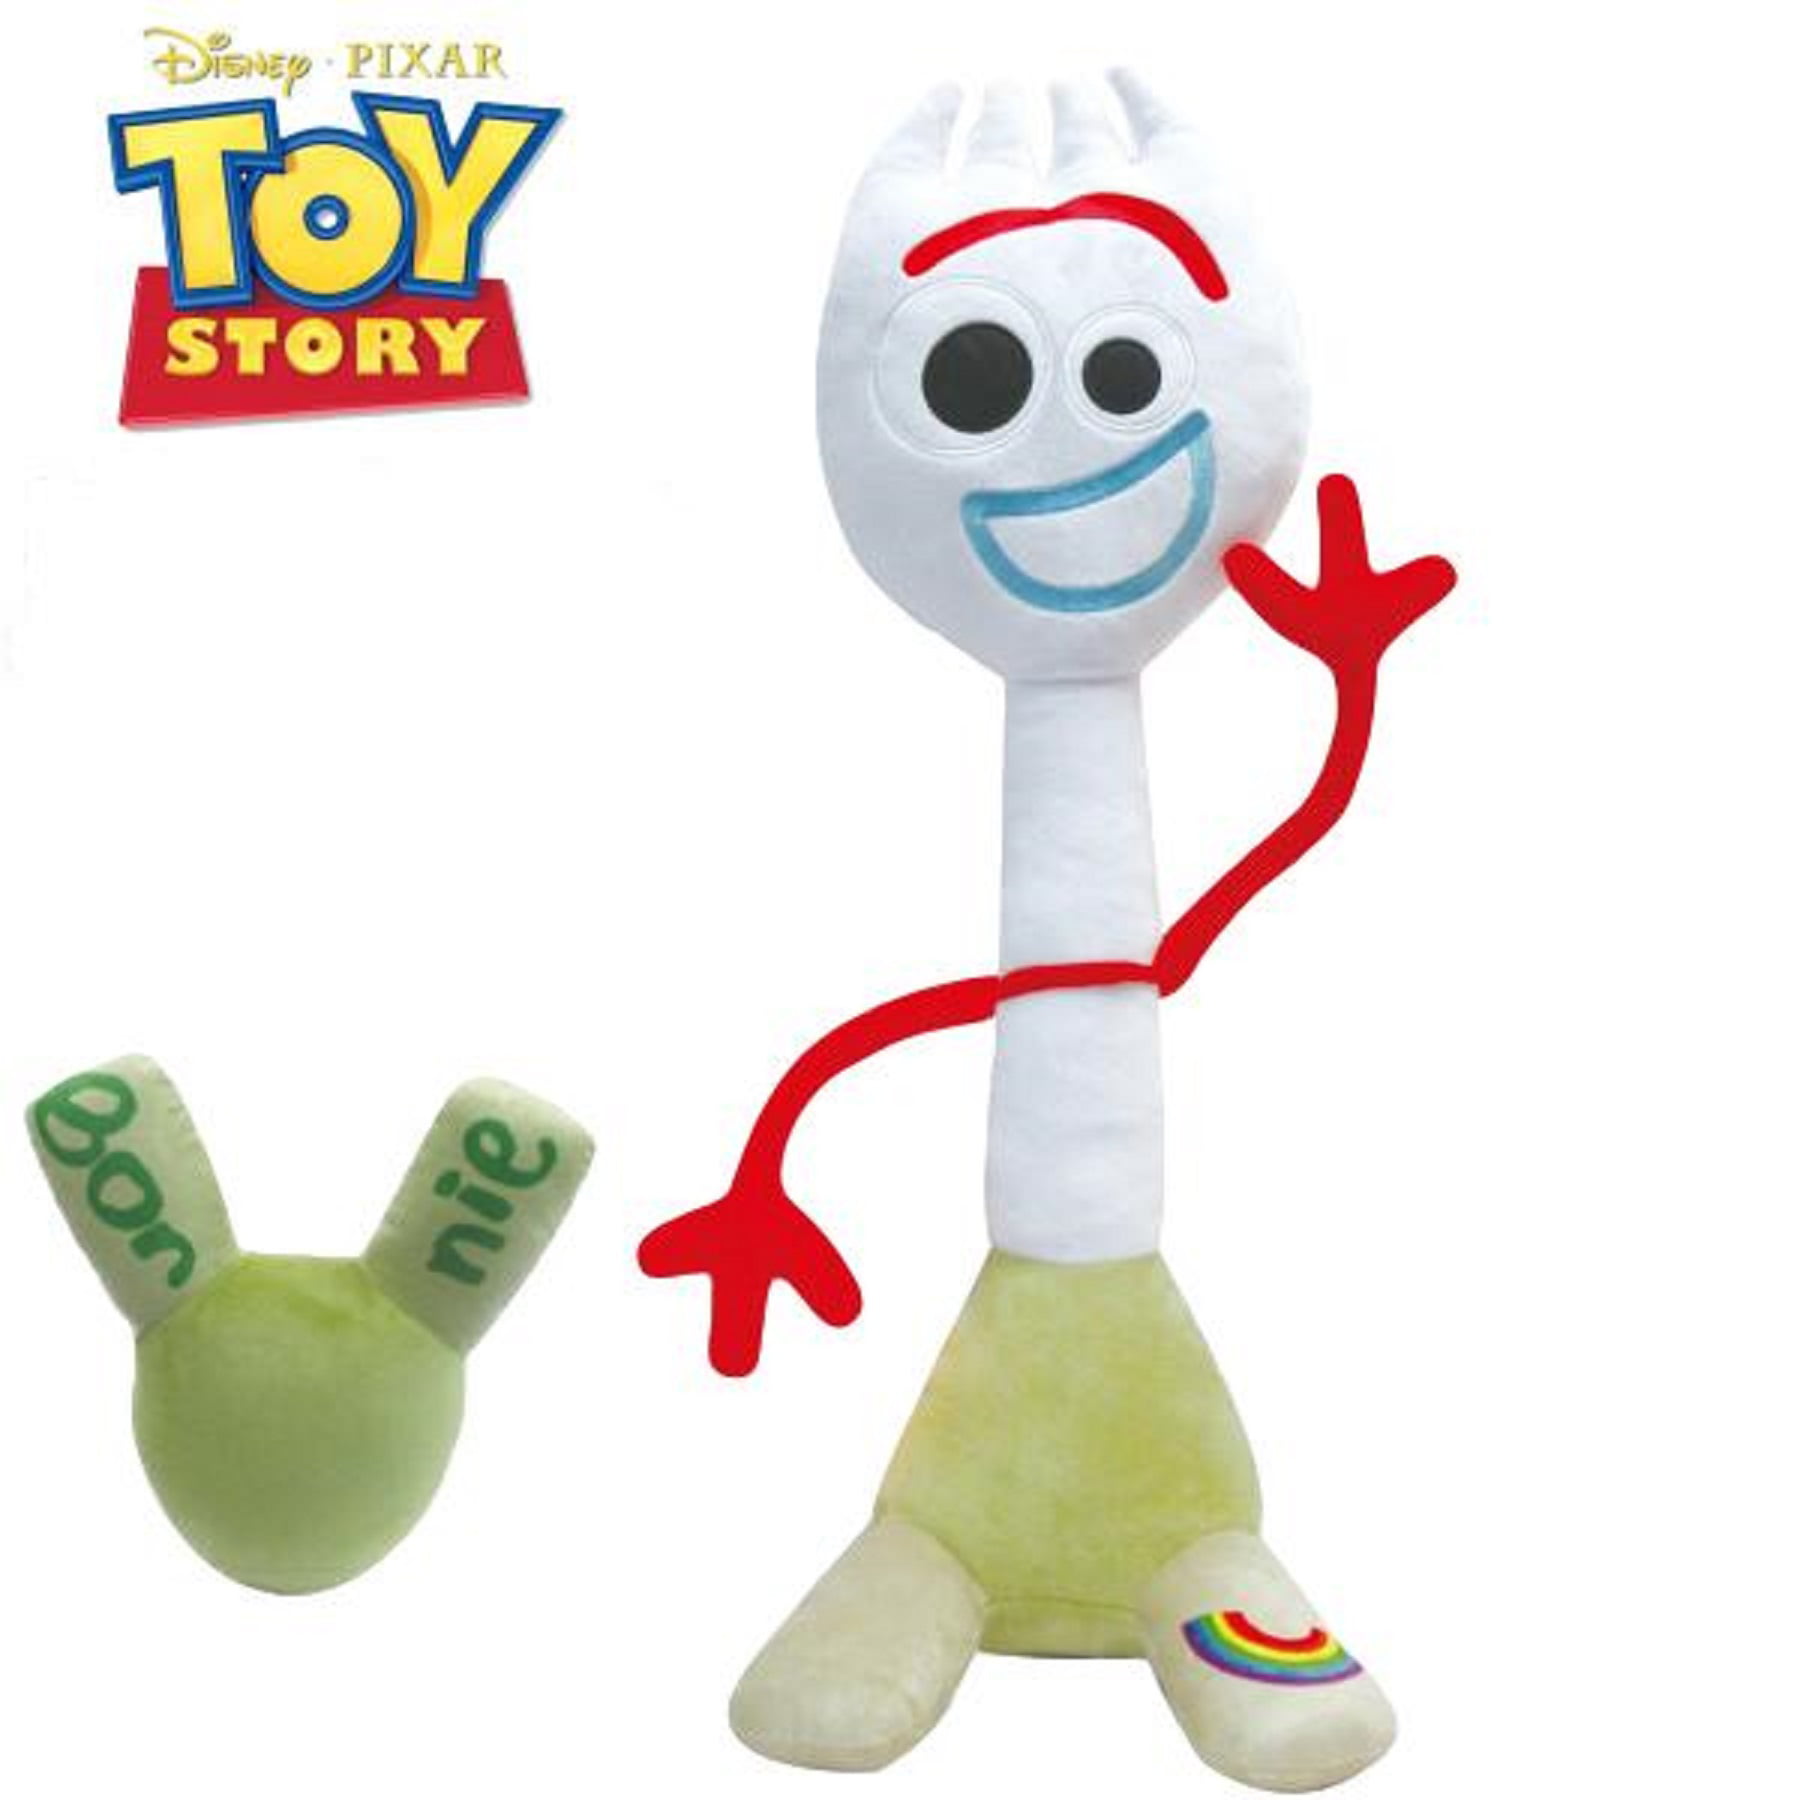 OFFICIAL BRAND NEW 23" JUMBO TOY STORY 4 FORKY SOFT PLUSH TOY 